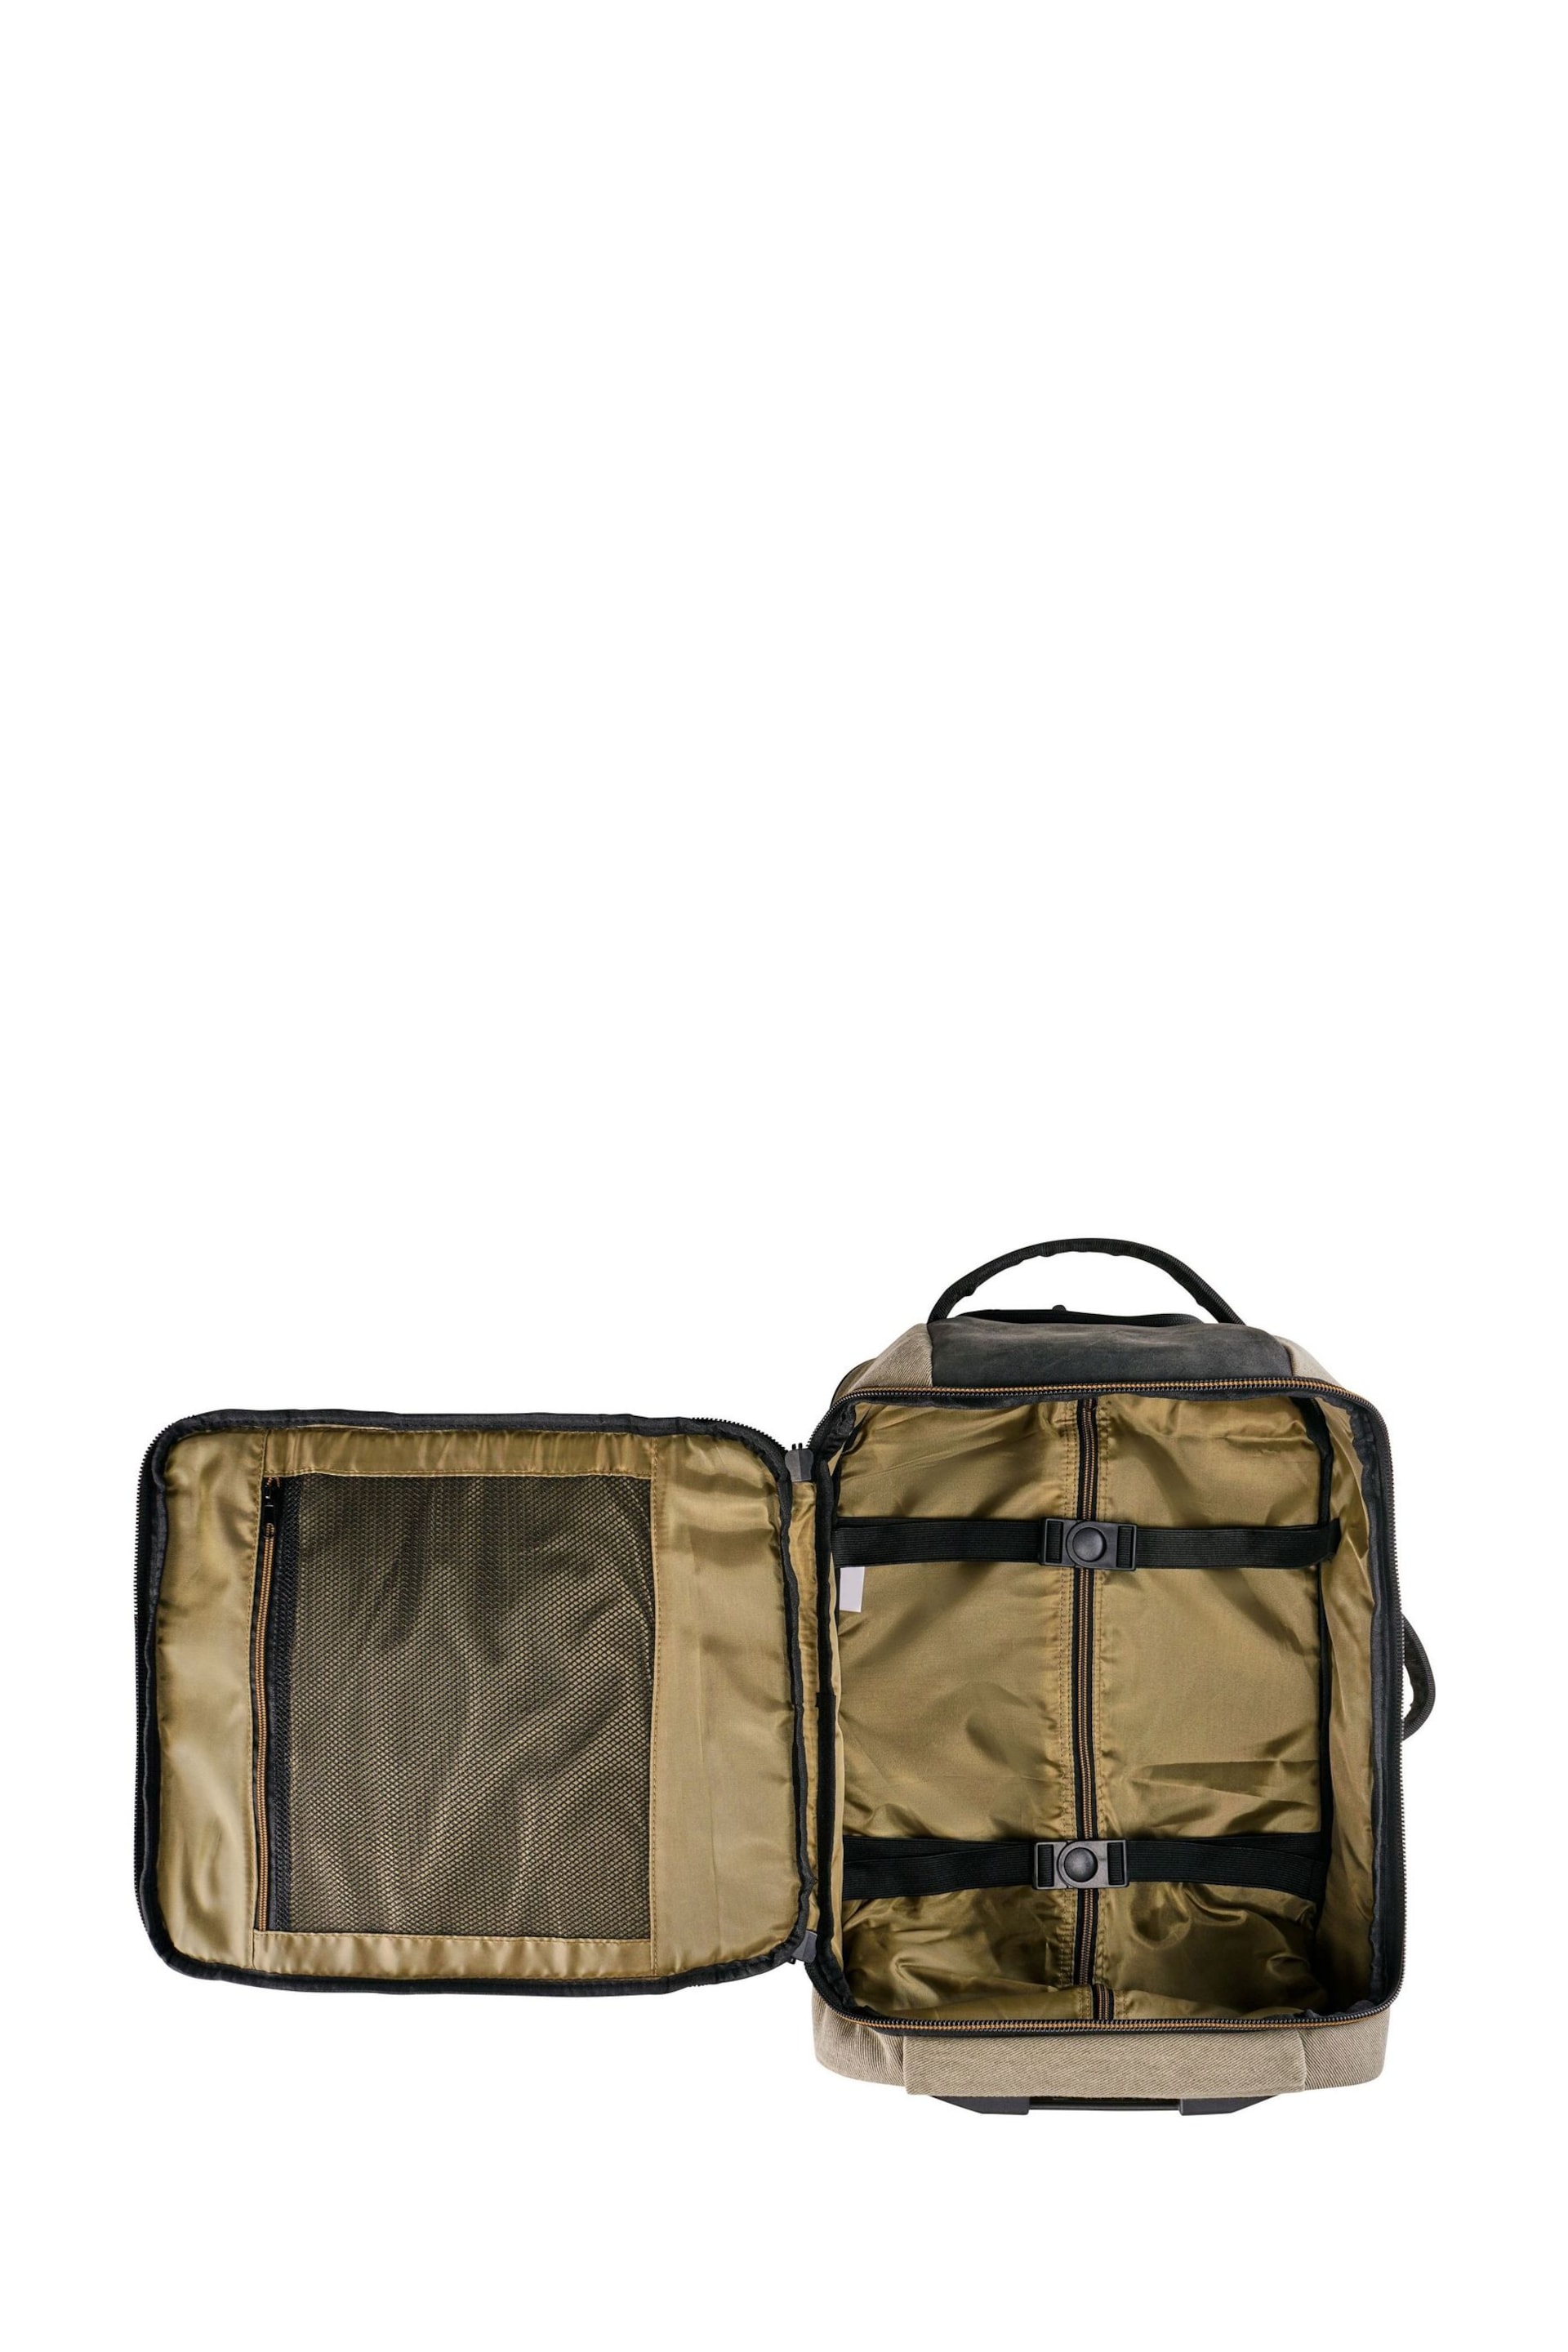 Cabin Max Manhattan Hybrid 30 Litre 45x36x20cm Backpack / Trolley Easyjet Carry on Hand Luggage - Image 6 of 10